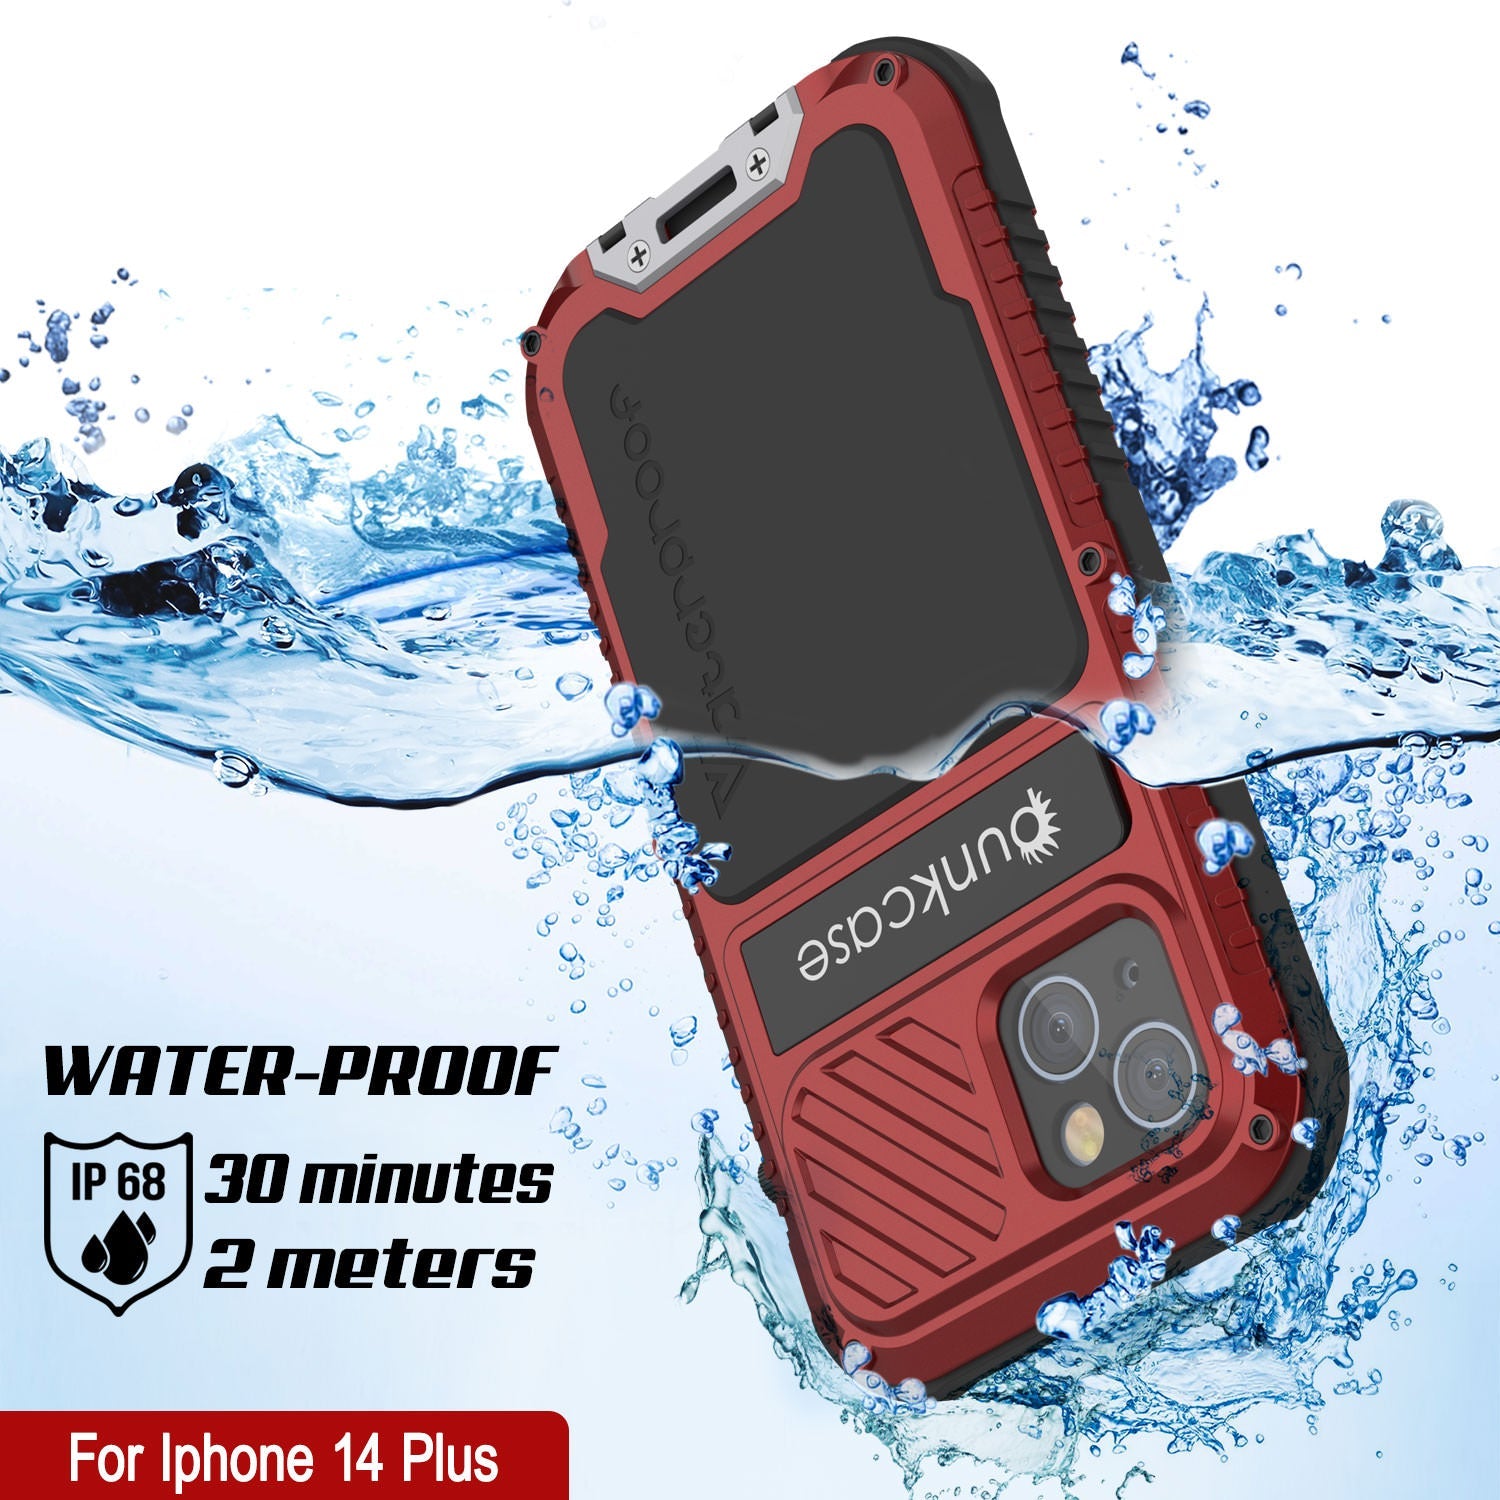 iPhone 14 Plus Metal Extreme 3.0 Case, Heavy Duty Military Grade Armor Cover [shock proof] Waterproof Aluminum Case [Red]